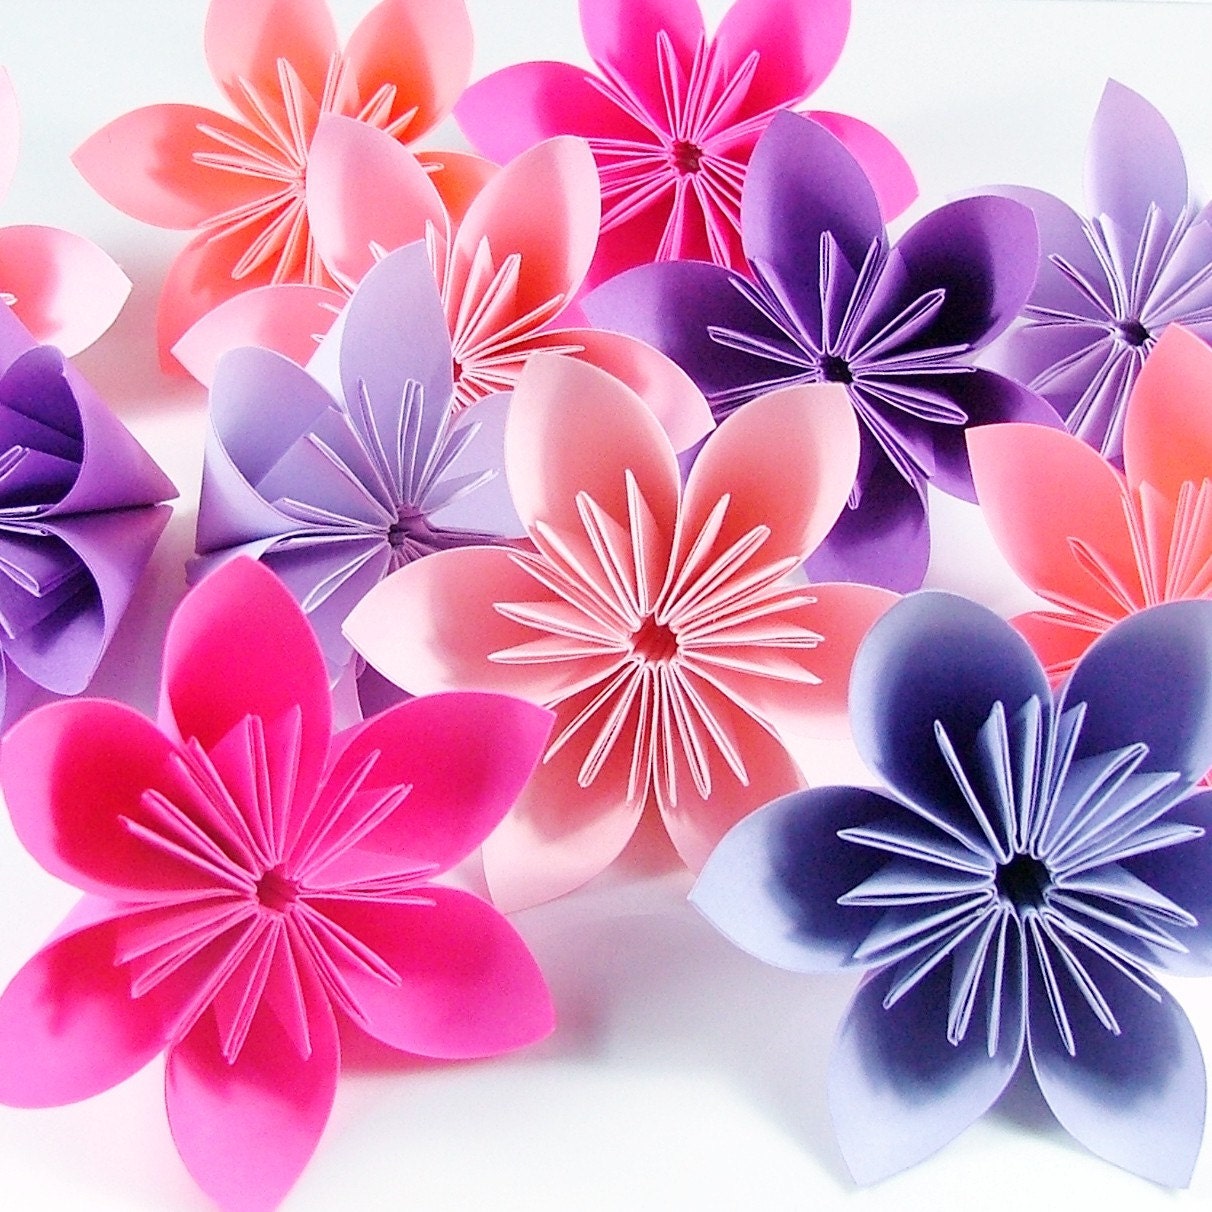 FLOWER FOLDING ORIGAMI « EMBROIDERY & ORIGAMI